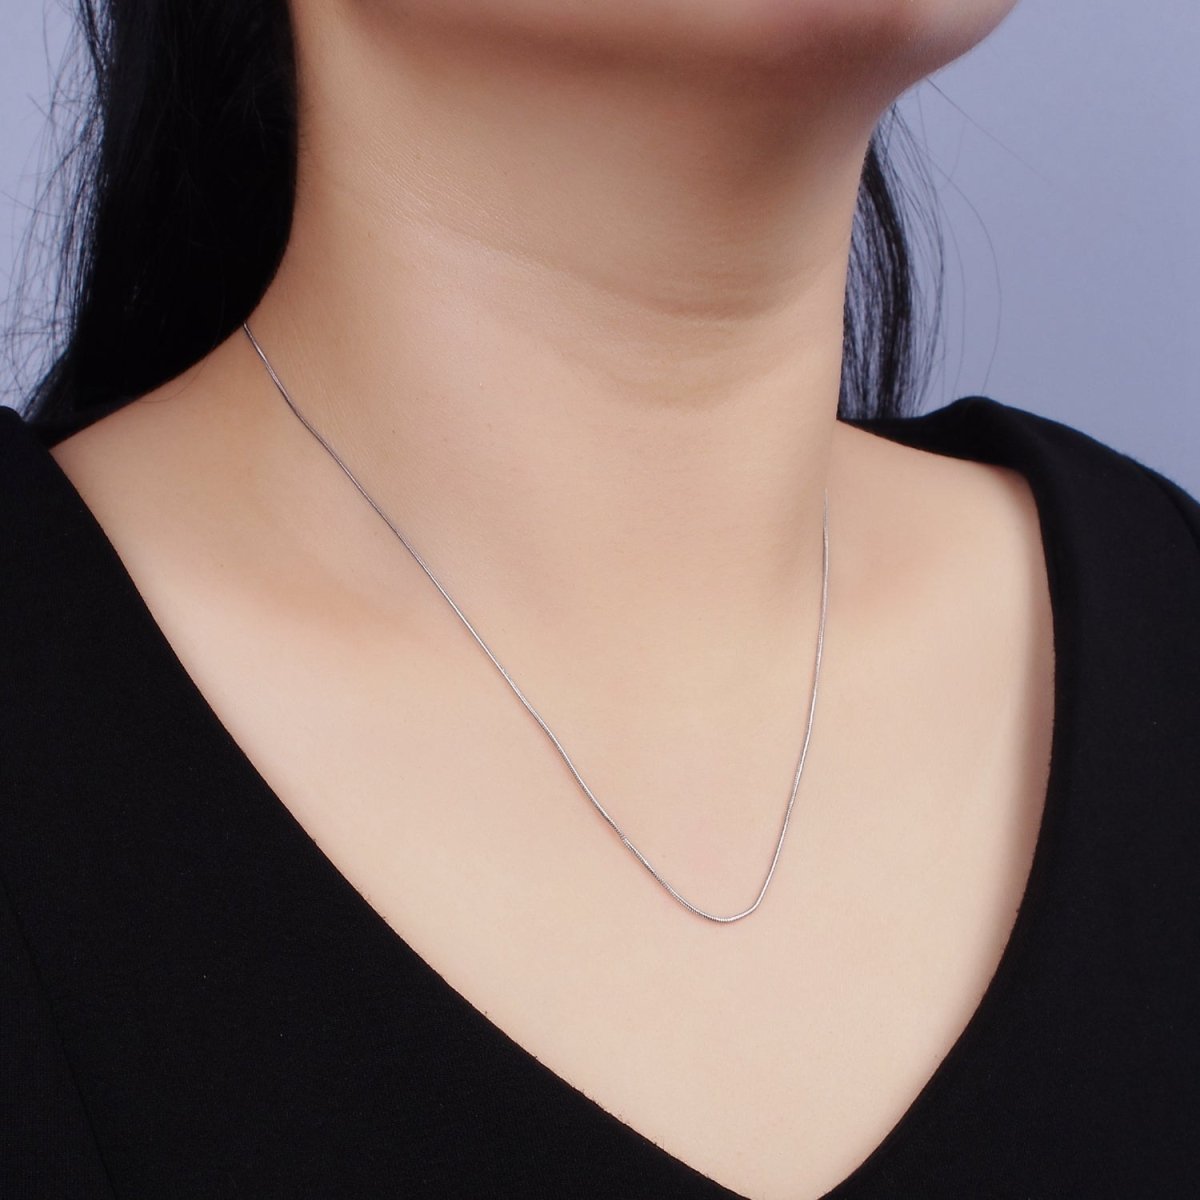 S925 Sterling Silver 0.8mm Dainty Snake Chain 15.35 Inch Chain Choker Necklace | WA-1965 Clearance Pricing - DLUXCA